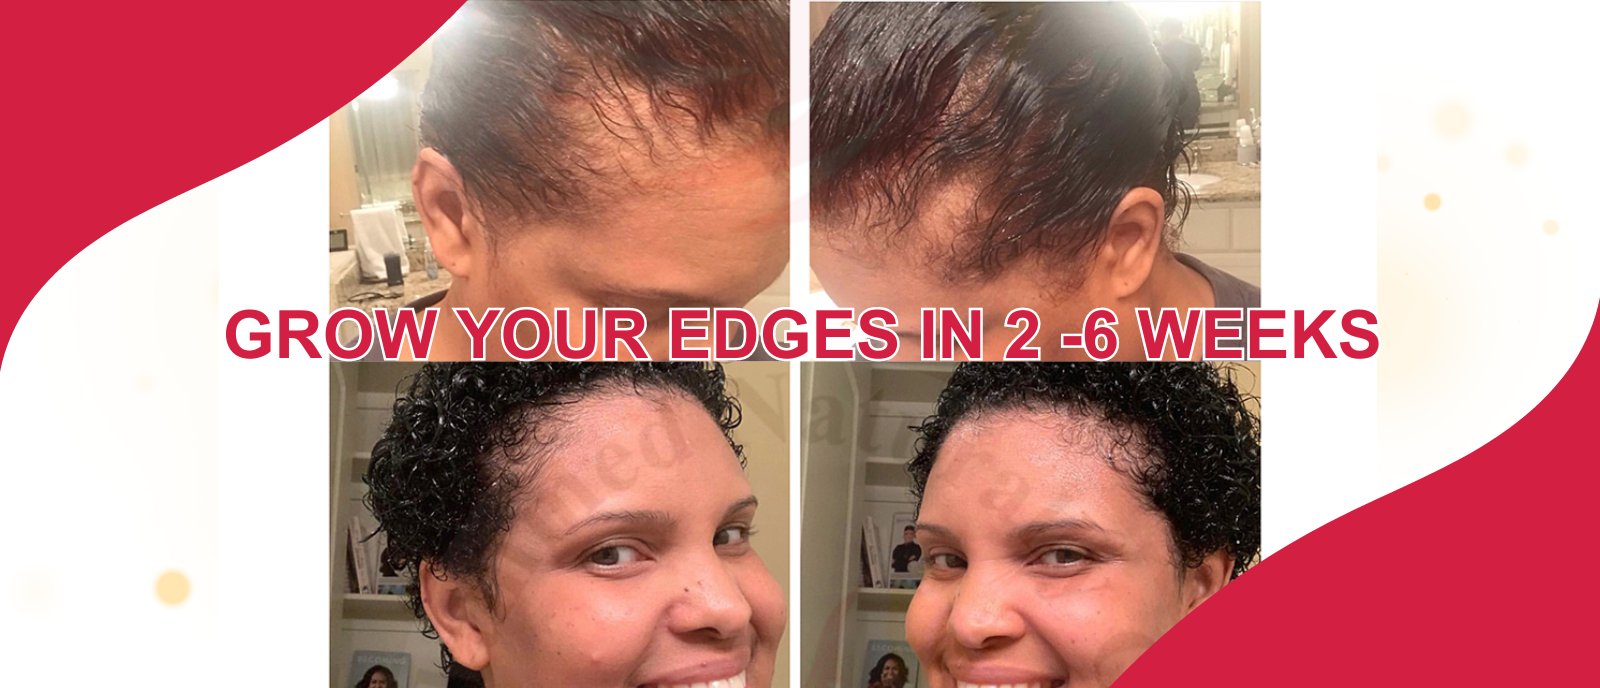 A Simple Trick To Grow Your Edges In 2 -6 Weeks - GlammedNaturallyOil